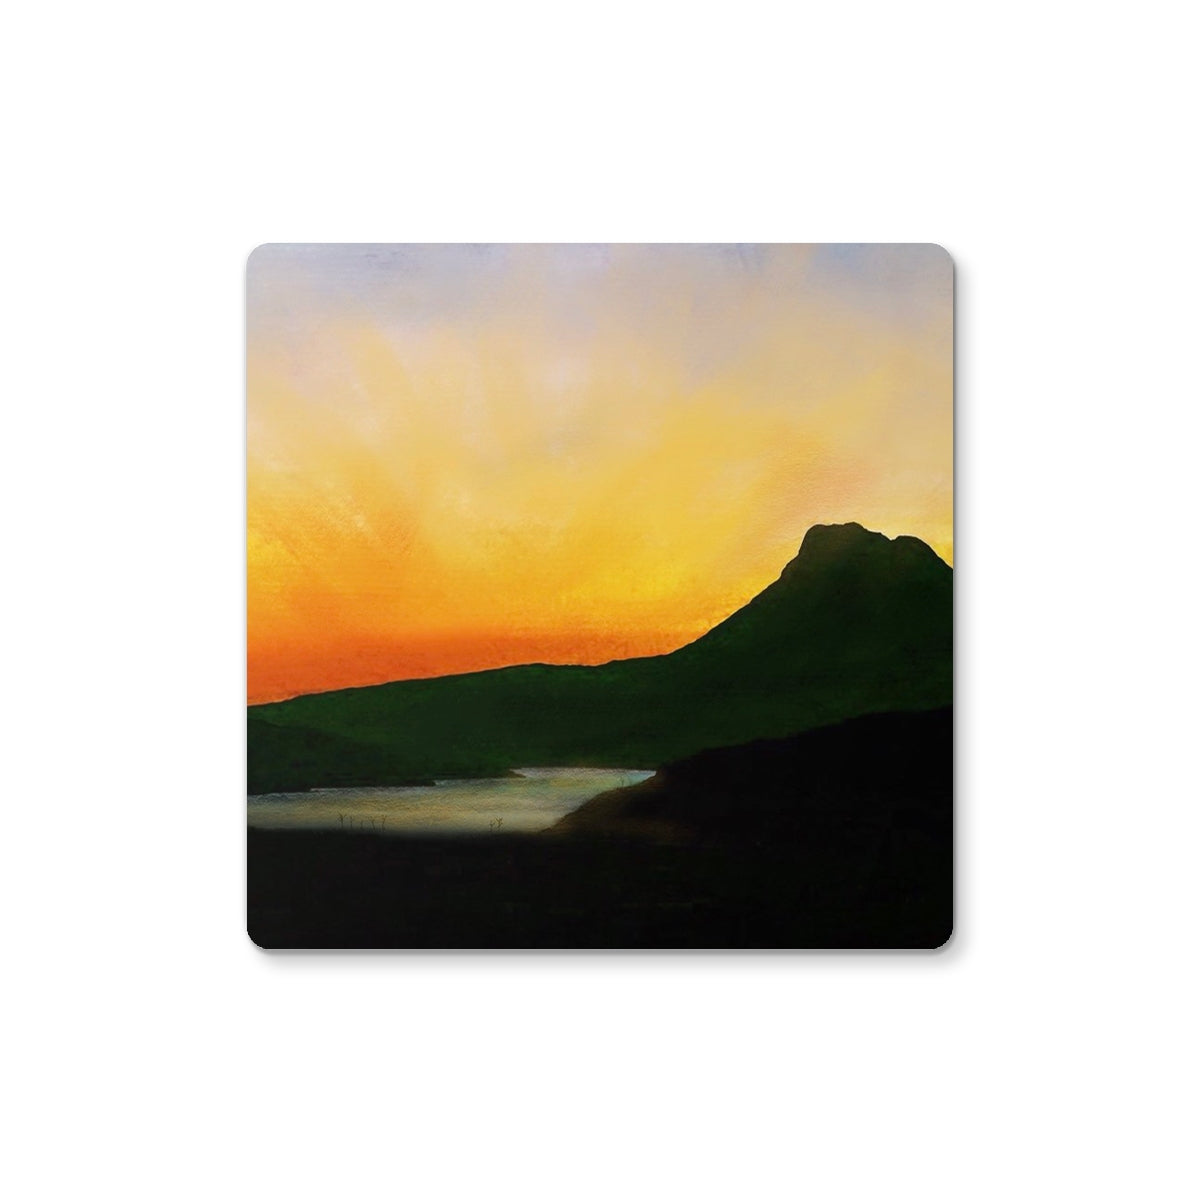 Stac Pollaidh Dusk Art Gifts Coaster-Homeware-Scottish Lochs & Mountains Art Gallery-2 Coasters-Paintings, Prints, Homeware, Art Gifts From Scotland By Scottish Artist Kevin Hunter